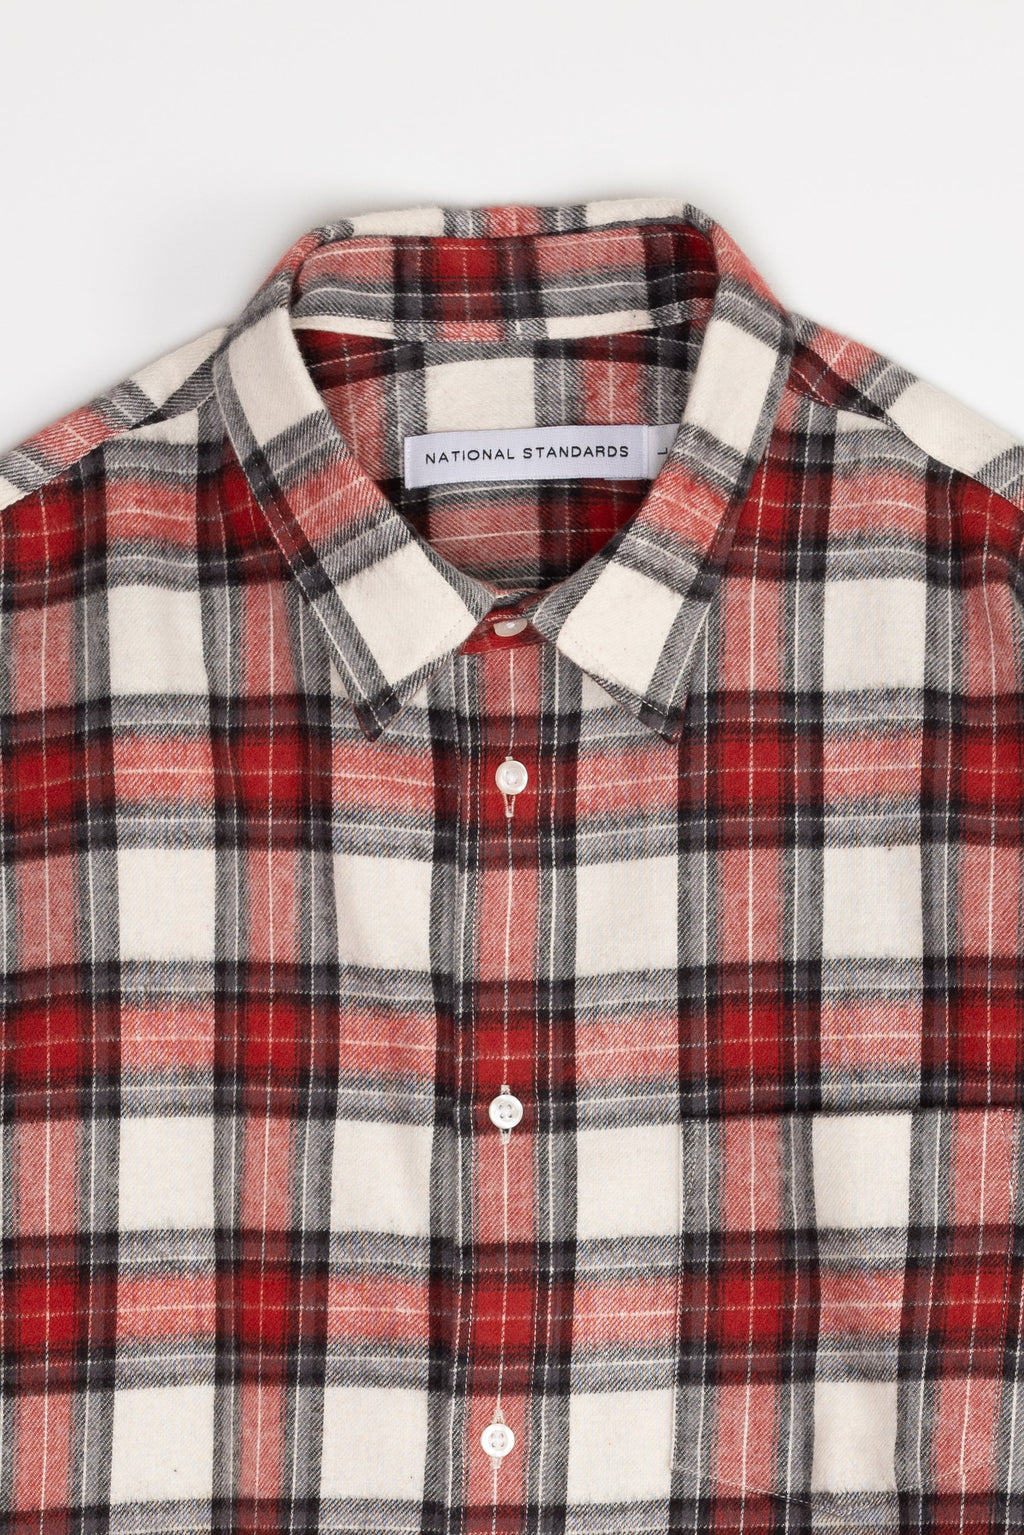 Japanese Shaggy Tartan in Red and Grey 05